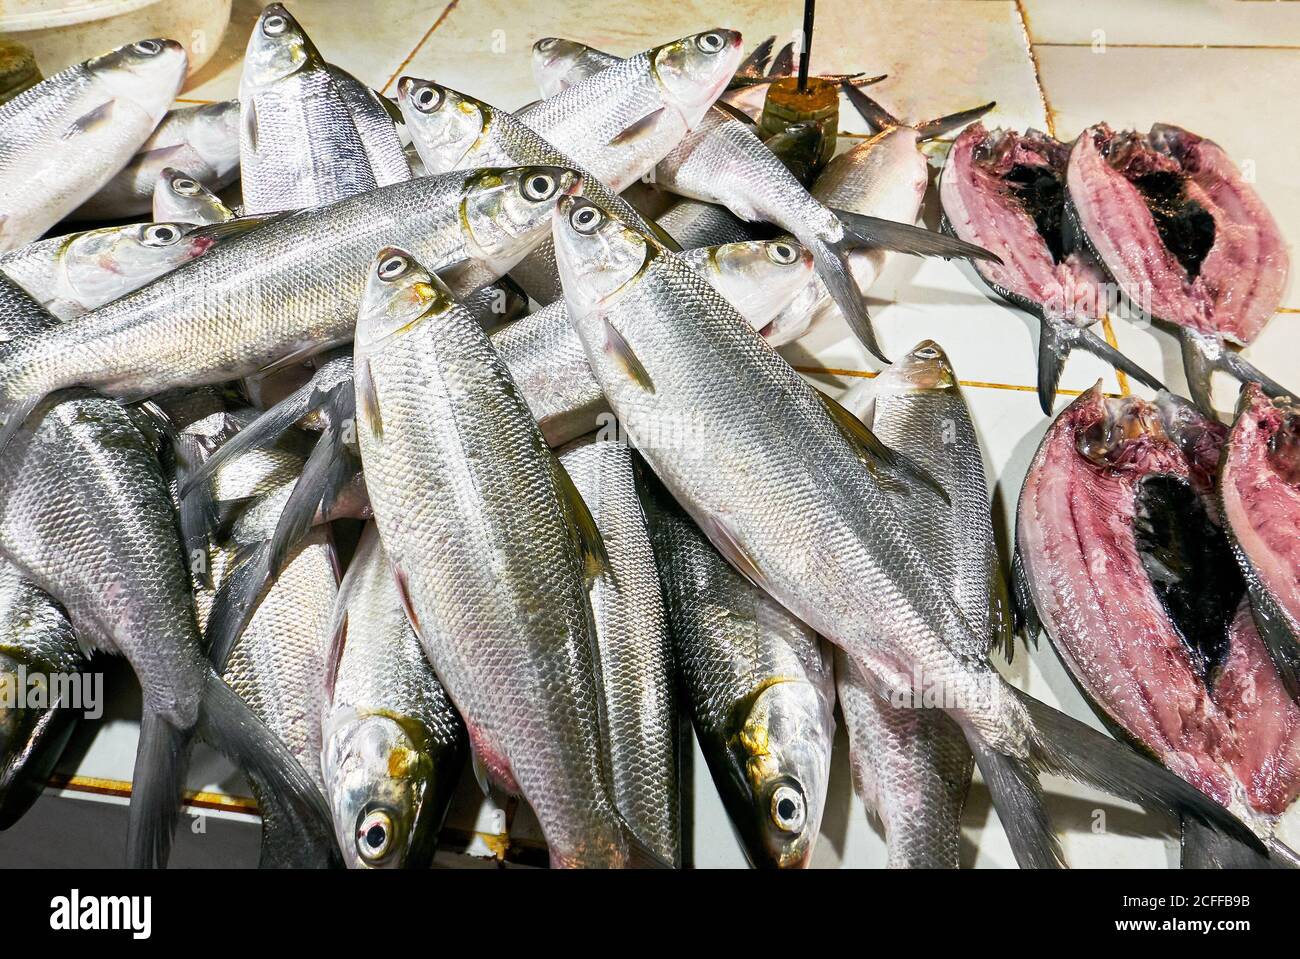 Isolated close-up of a heap of silver colored fresh bangus milk fish for sale at the Central Market in Iloilo City, Philippines Stock Photo